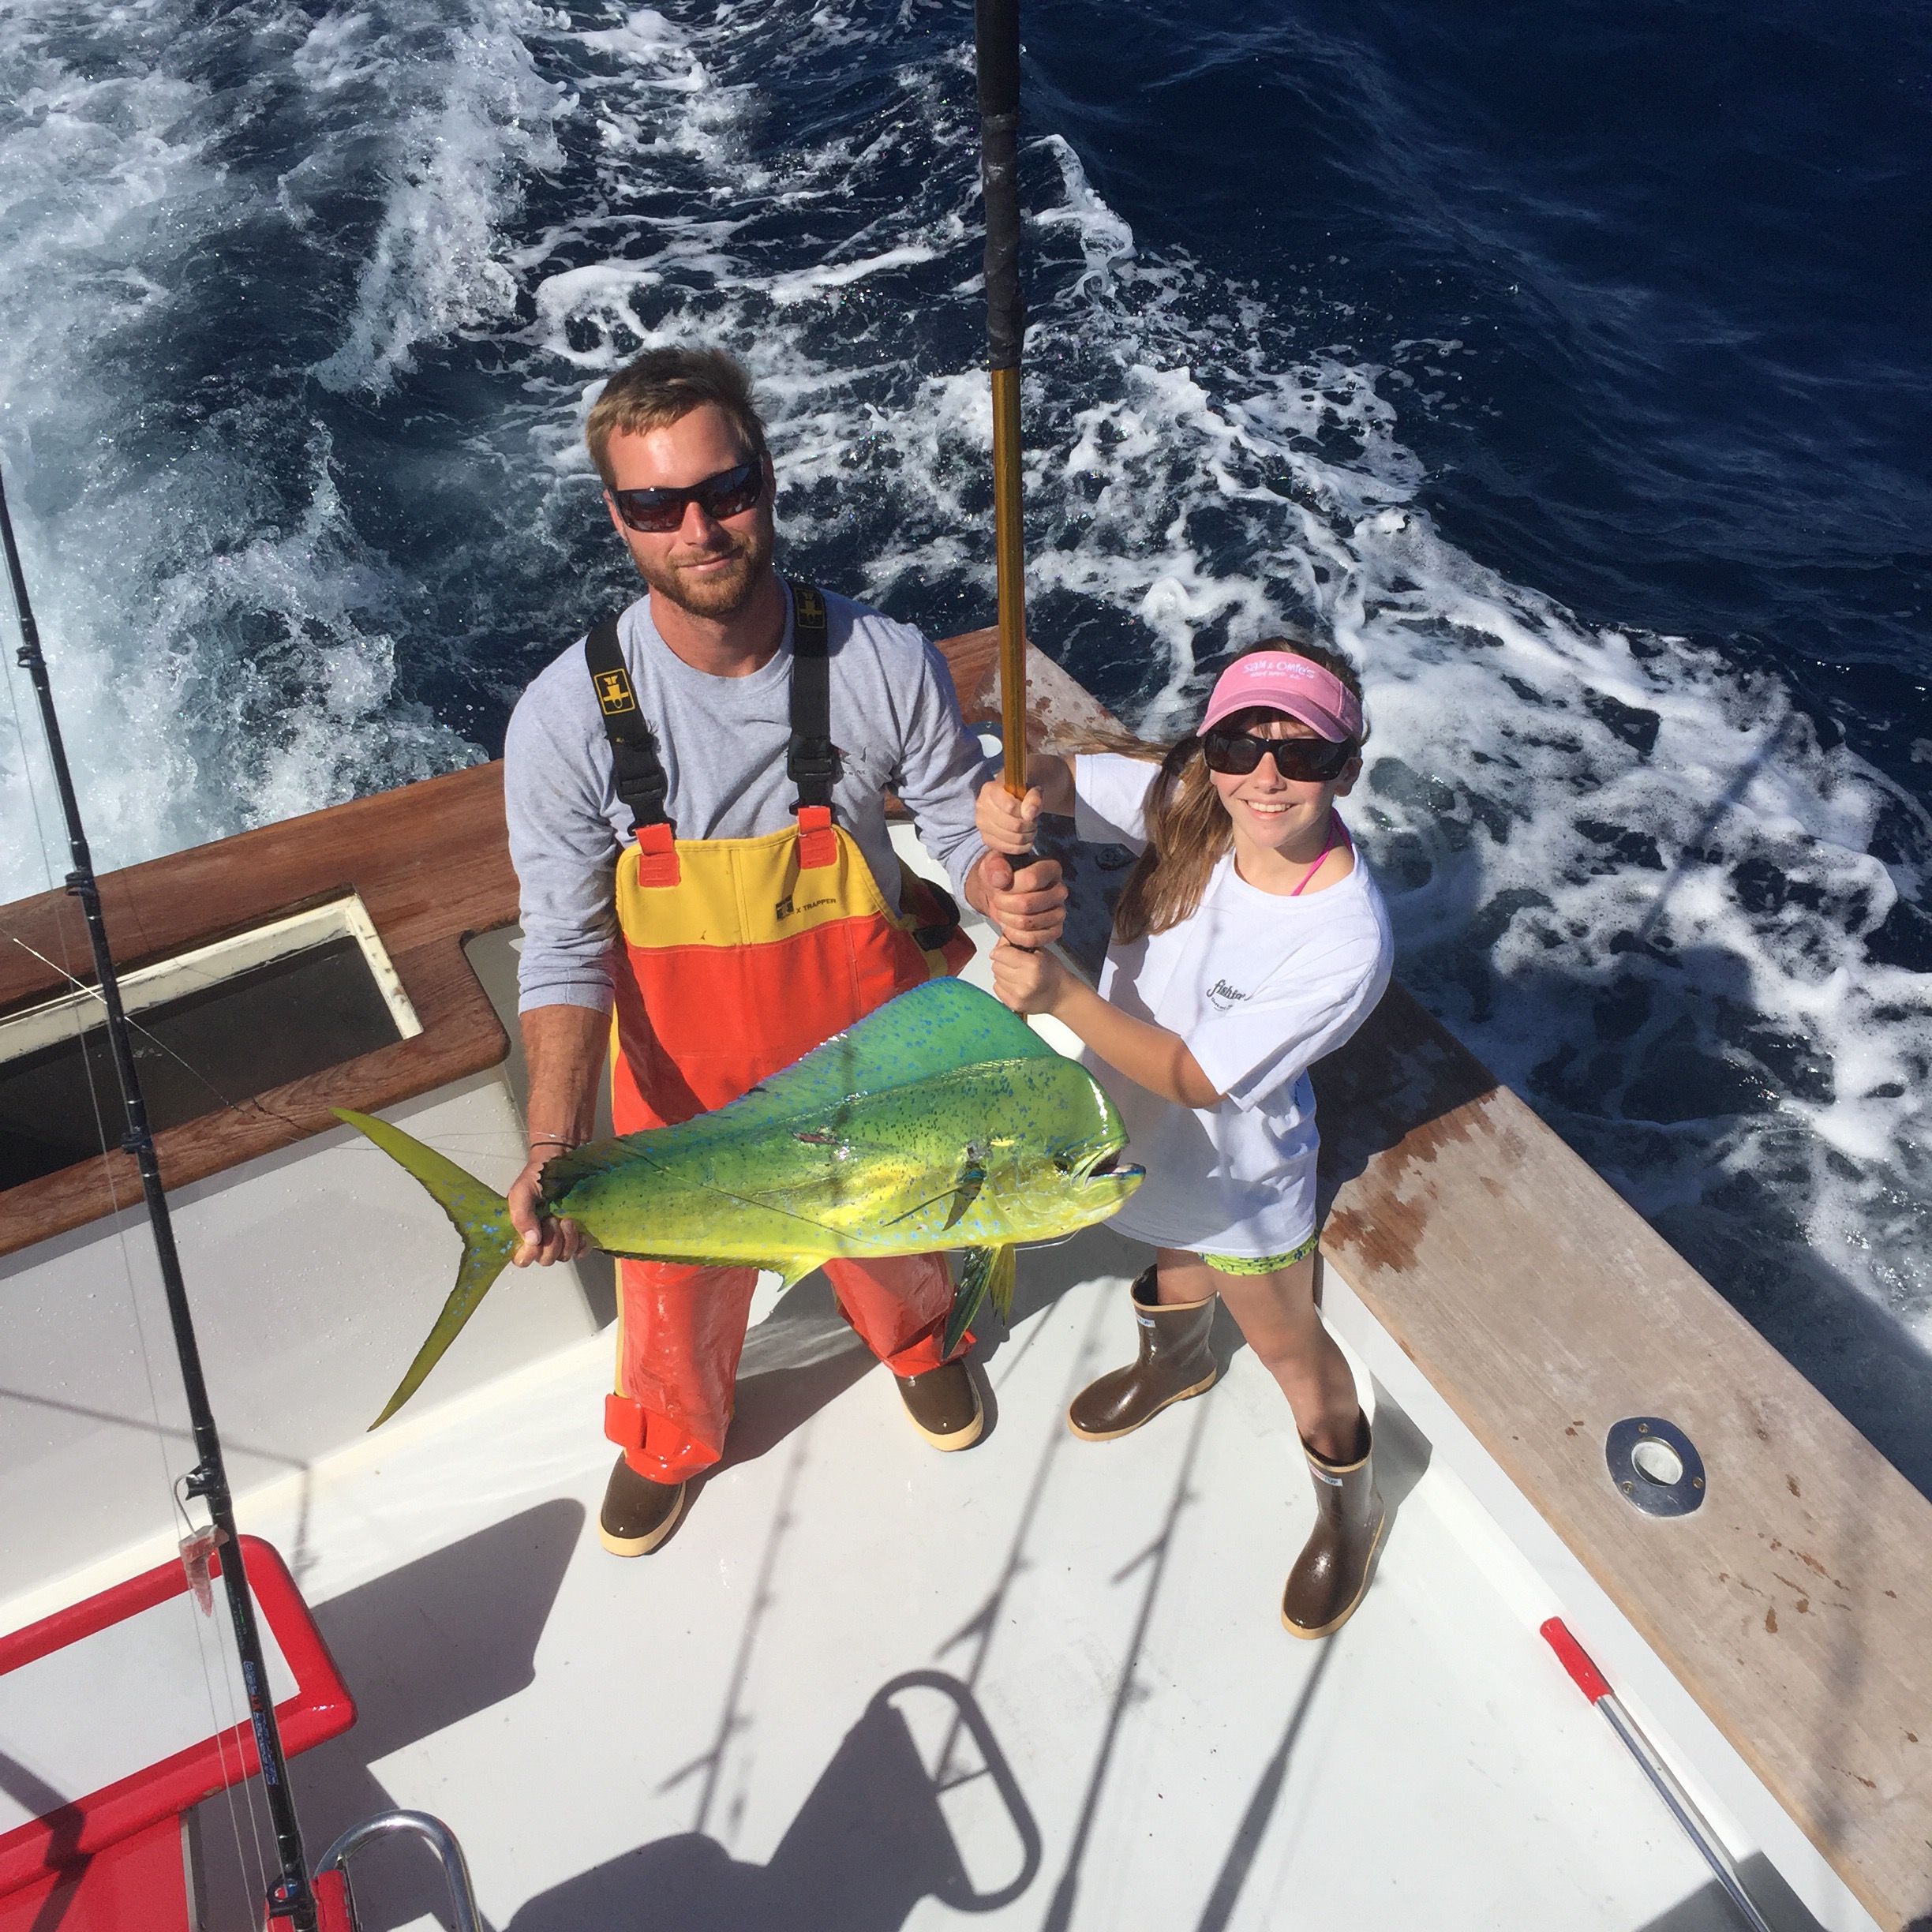 Fishing Report - Fishin Frenzy - Report on the latest OBX charter fishing